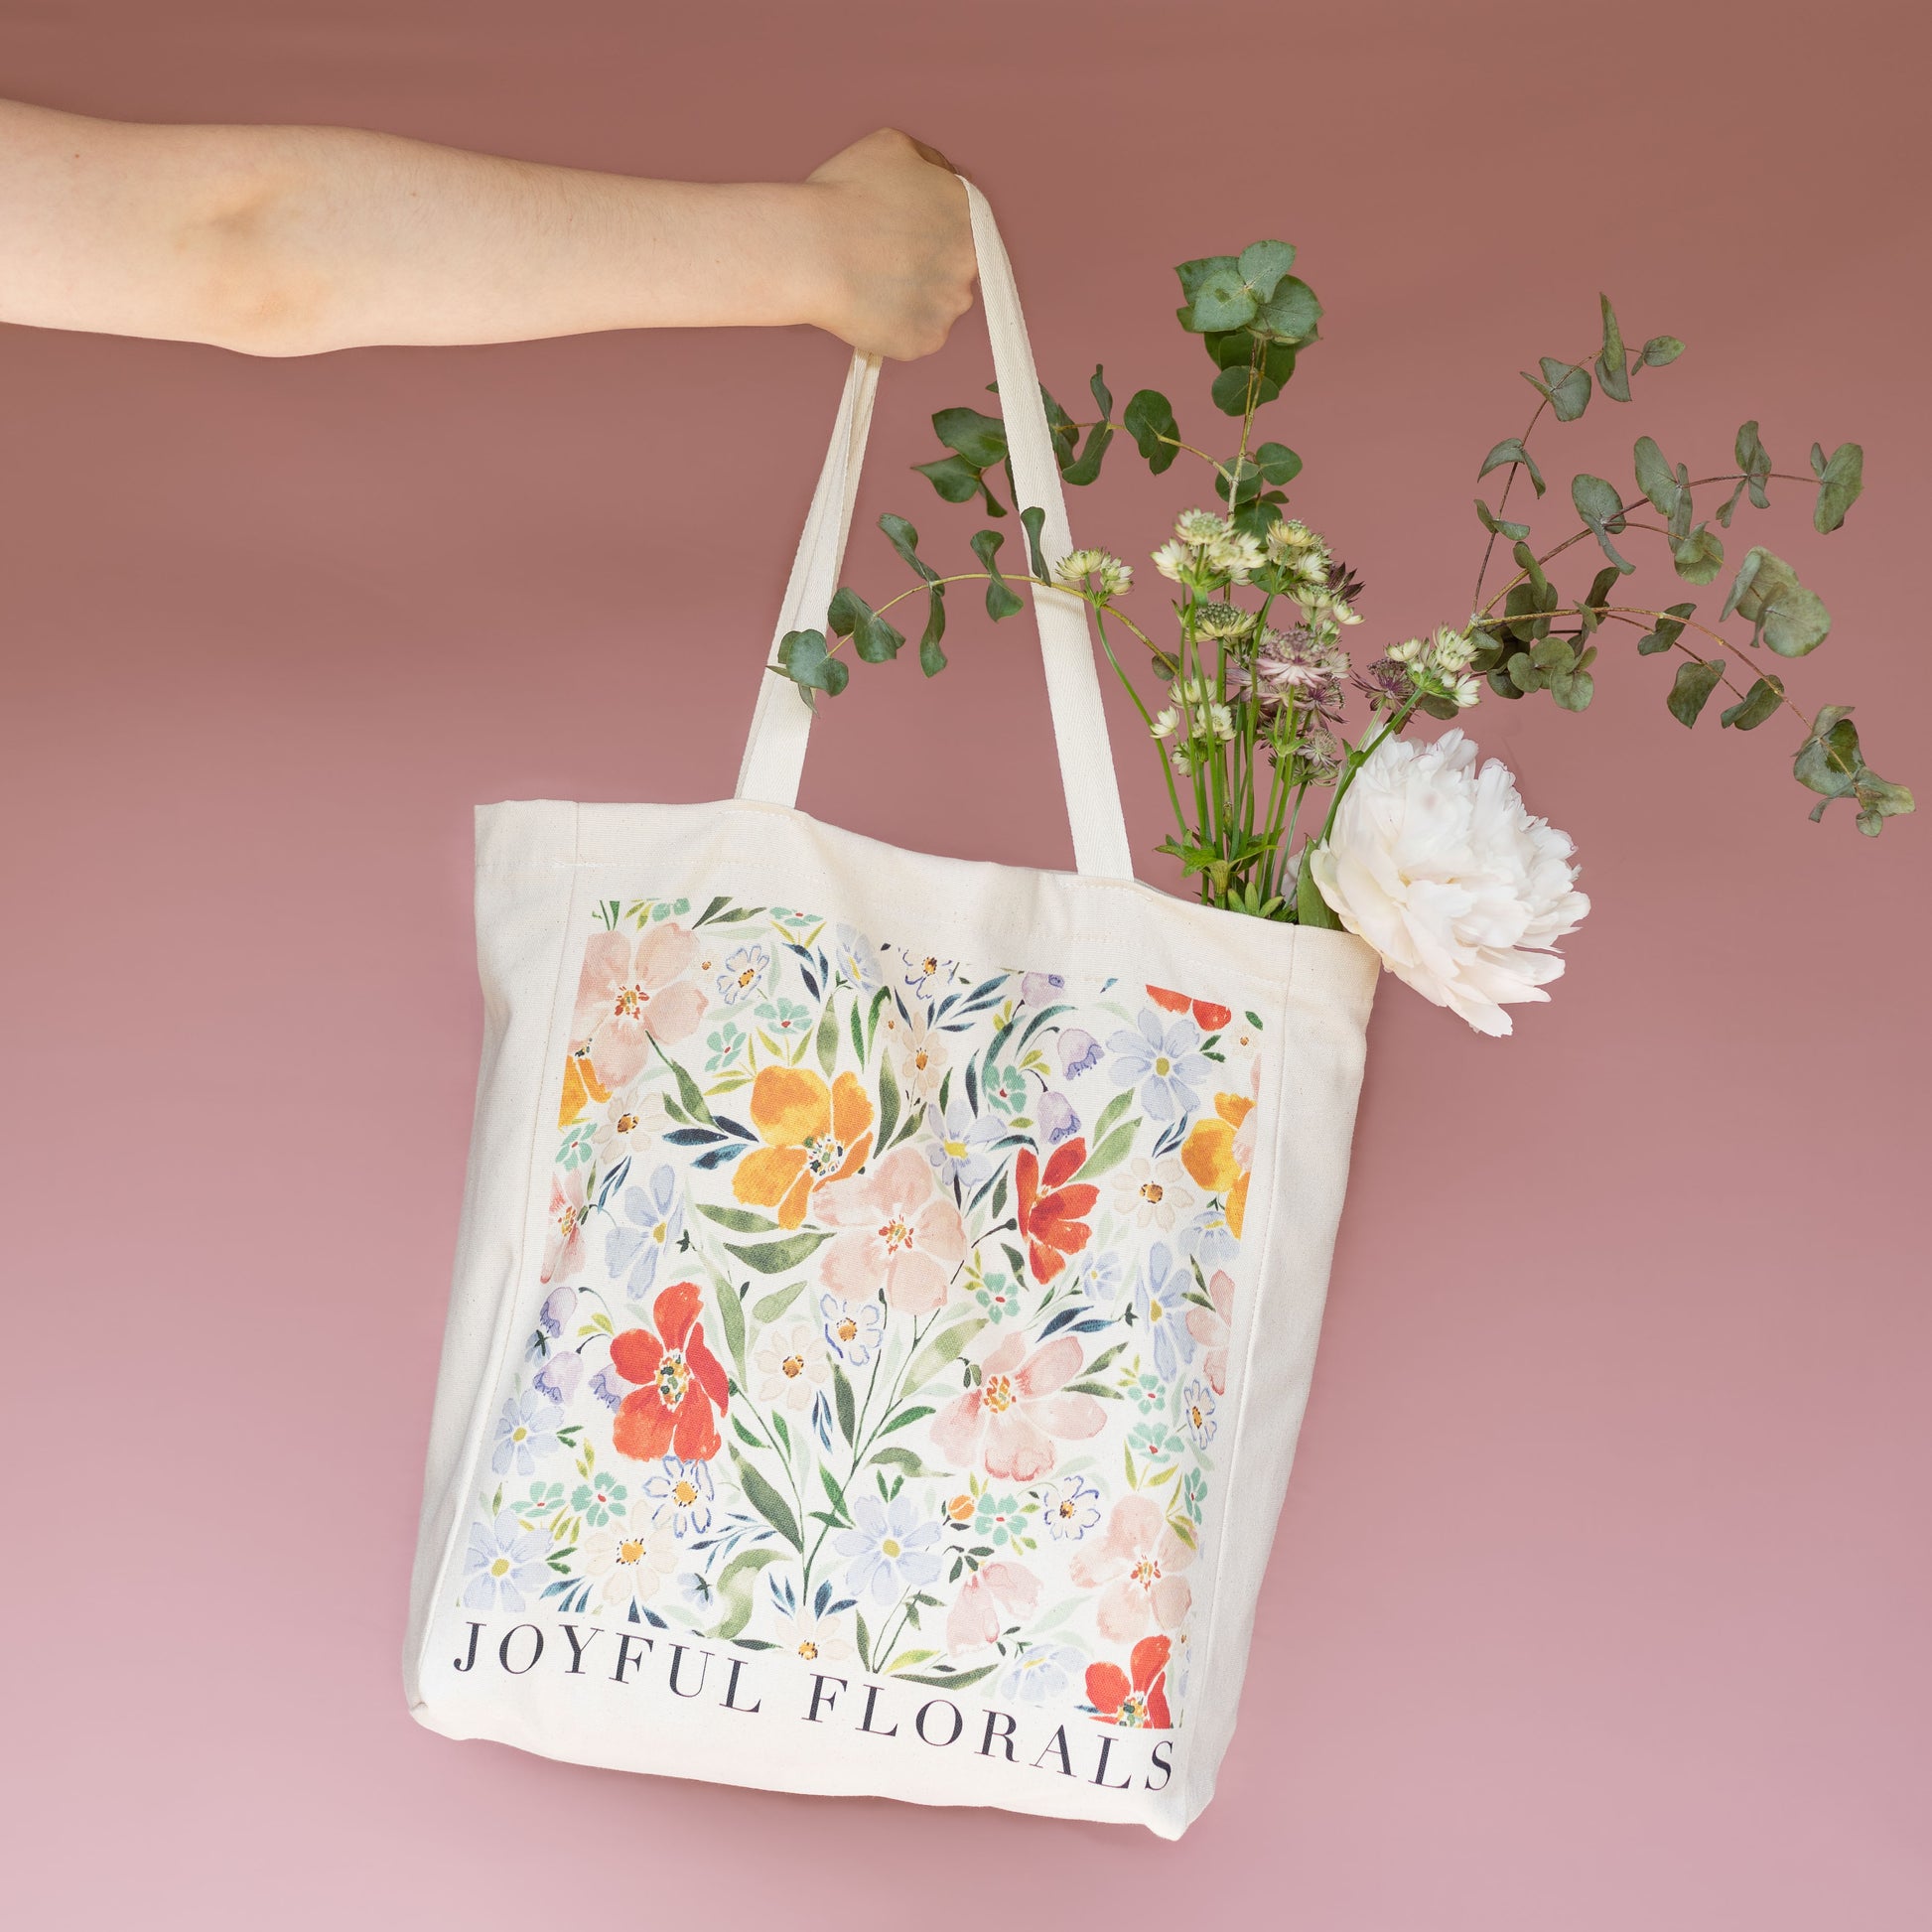 tote bag carrying farmers market flowers